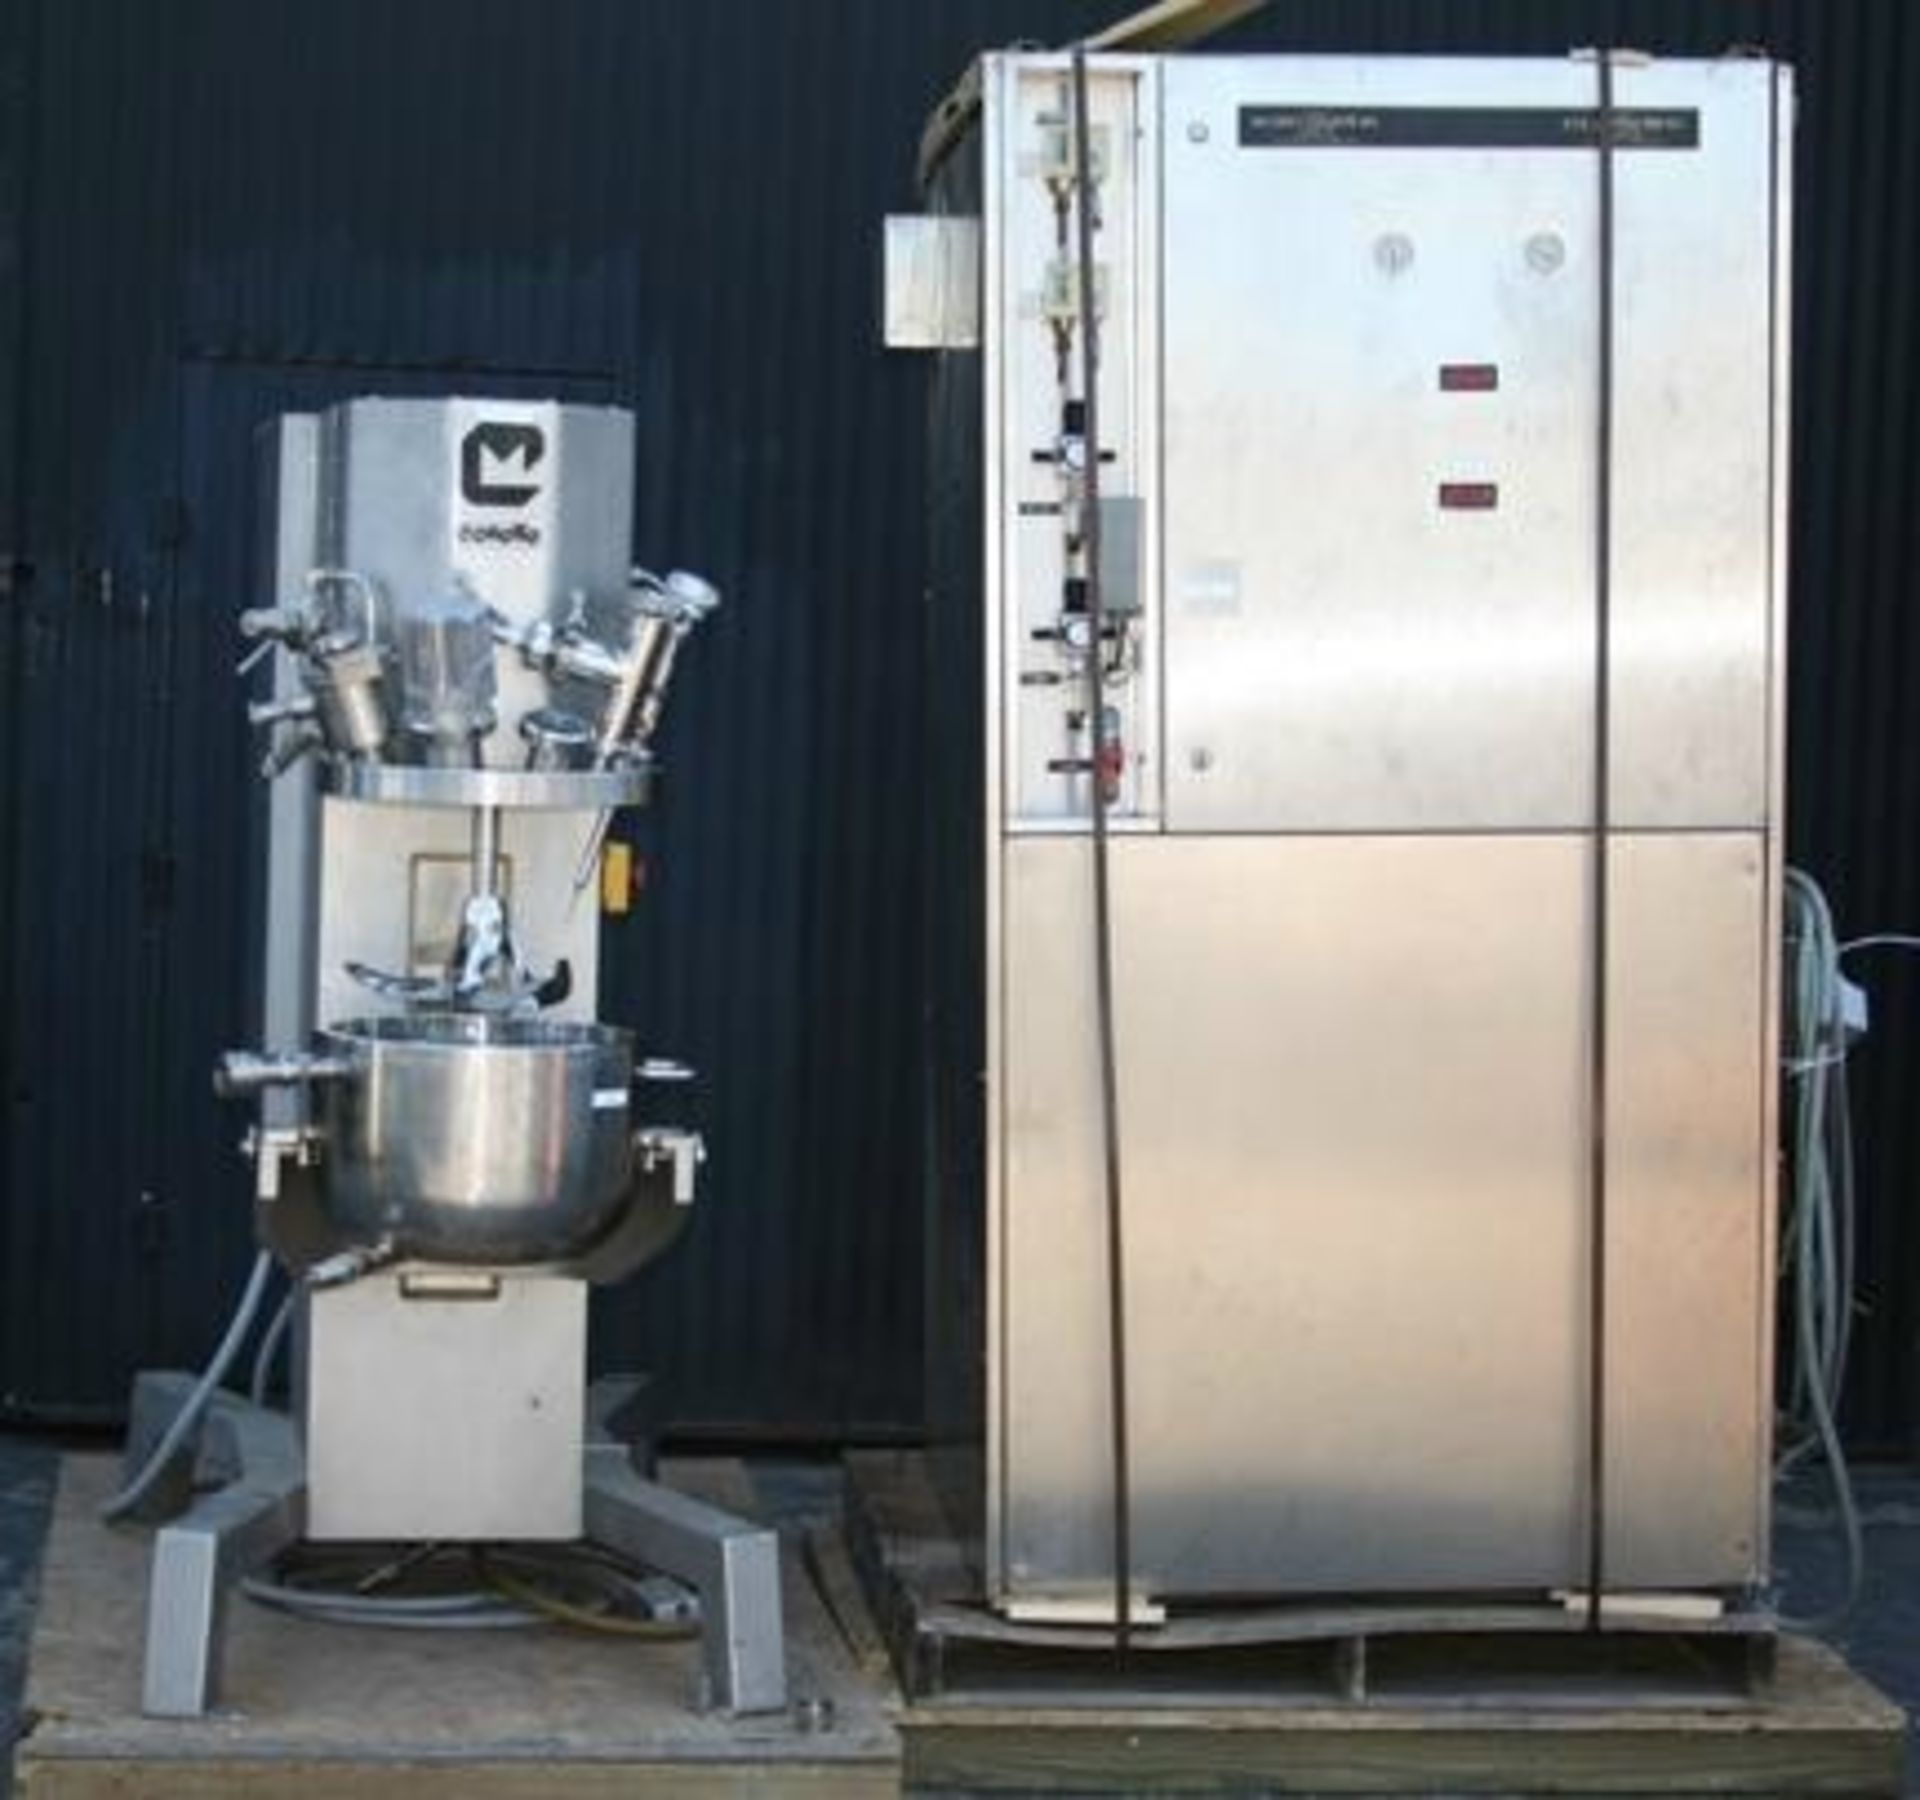 Collette shear granulating mixer, model GRAL 25 PRO, 25 liter capacity, stainless steel - Image 25 of 25